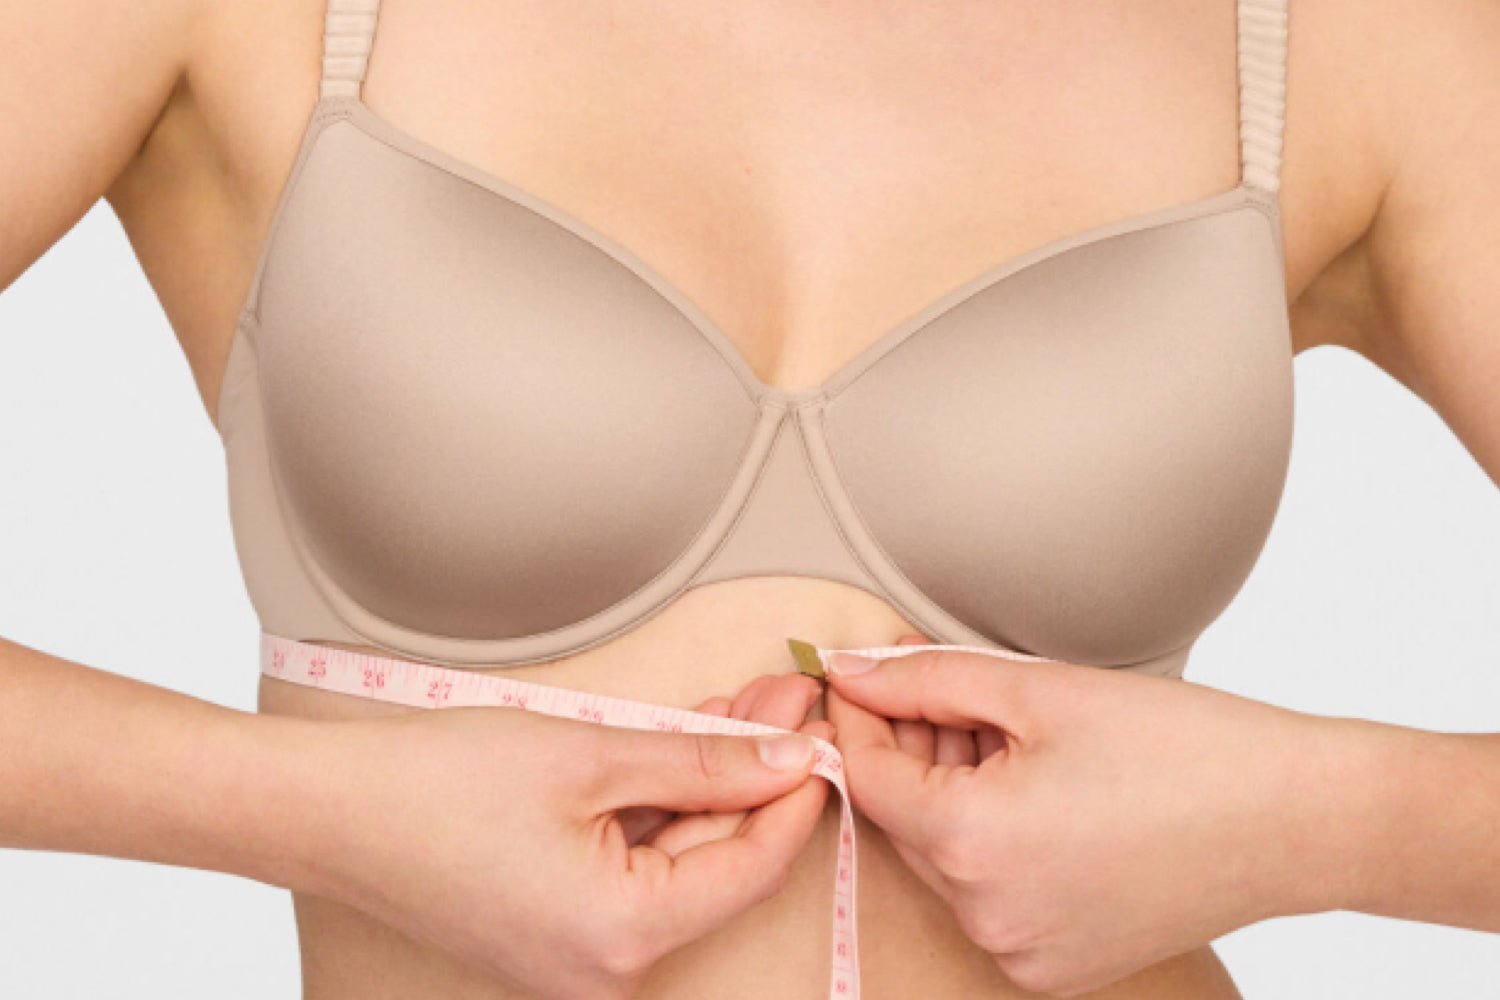 Is Your Bra Cup Size Too Big but the Band Fits? Here's What To Do